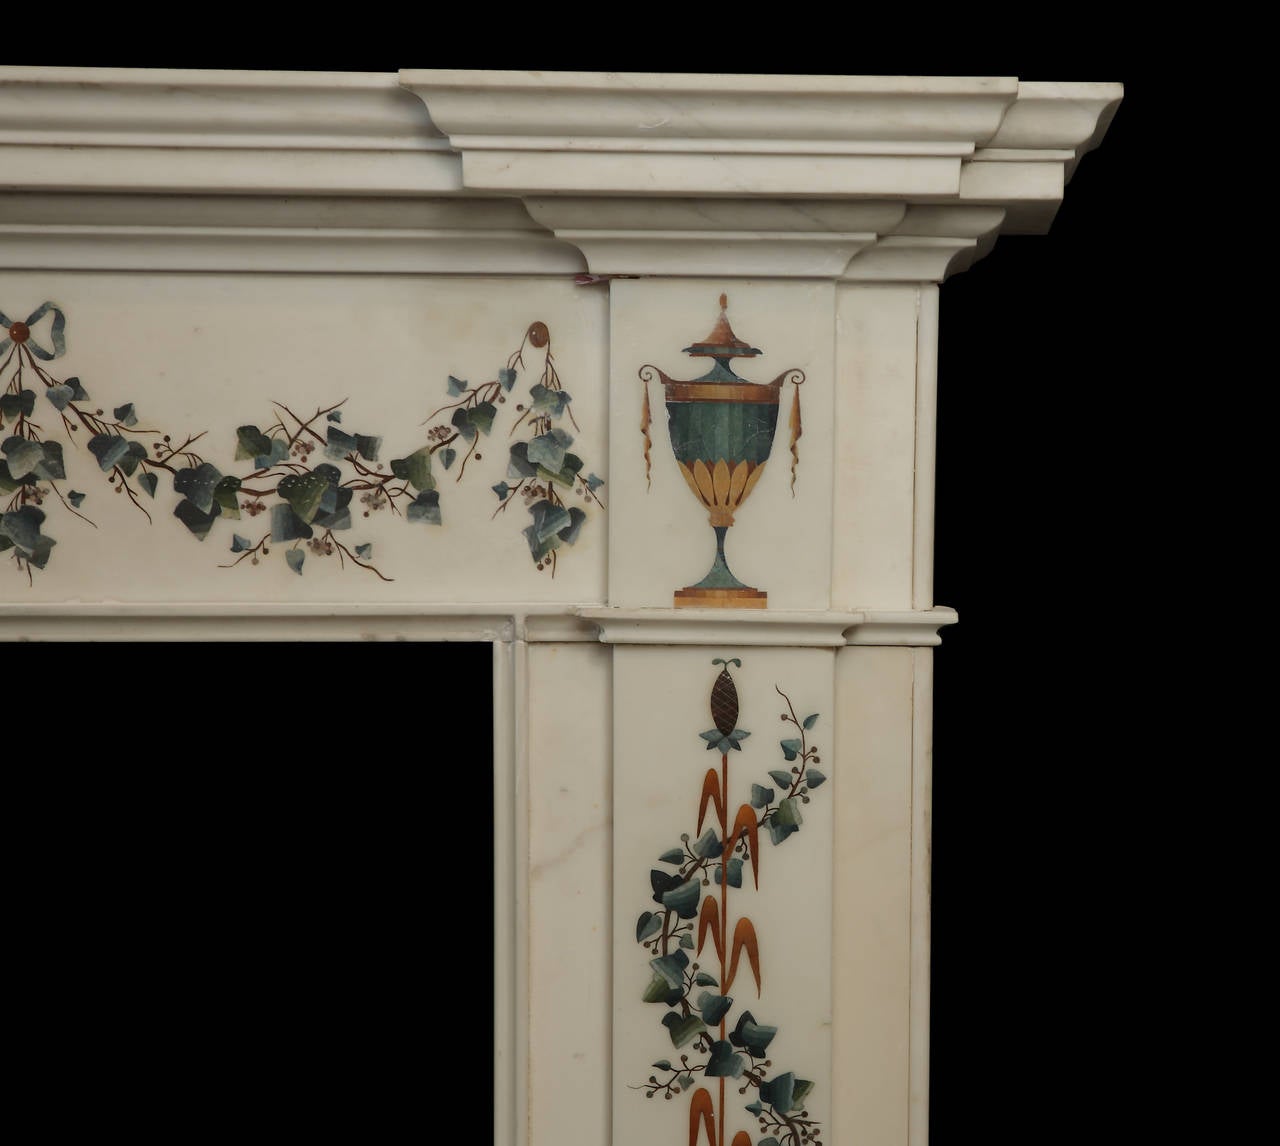 A George III scagliola inlaid Carrara marble chimney piece Irish, late 18th century, attributed to Pietro Bossi.

Opening dimensions: 46 1/4” W x 45 1/8” H.